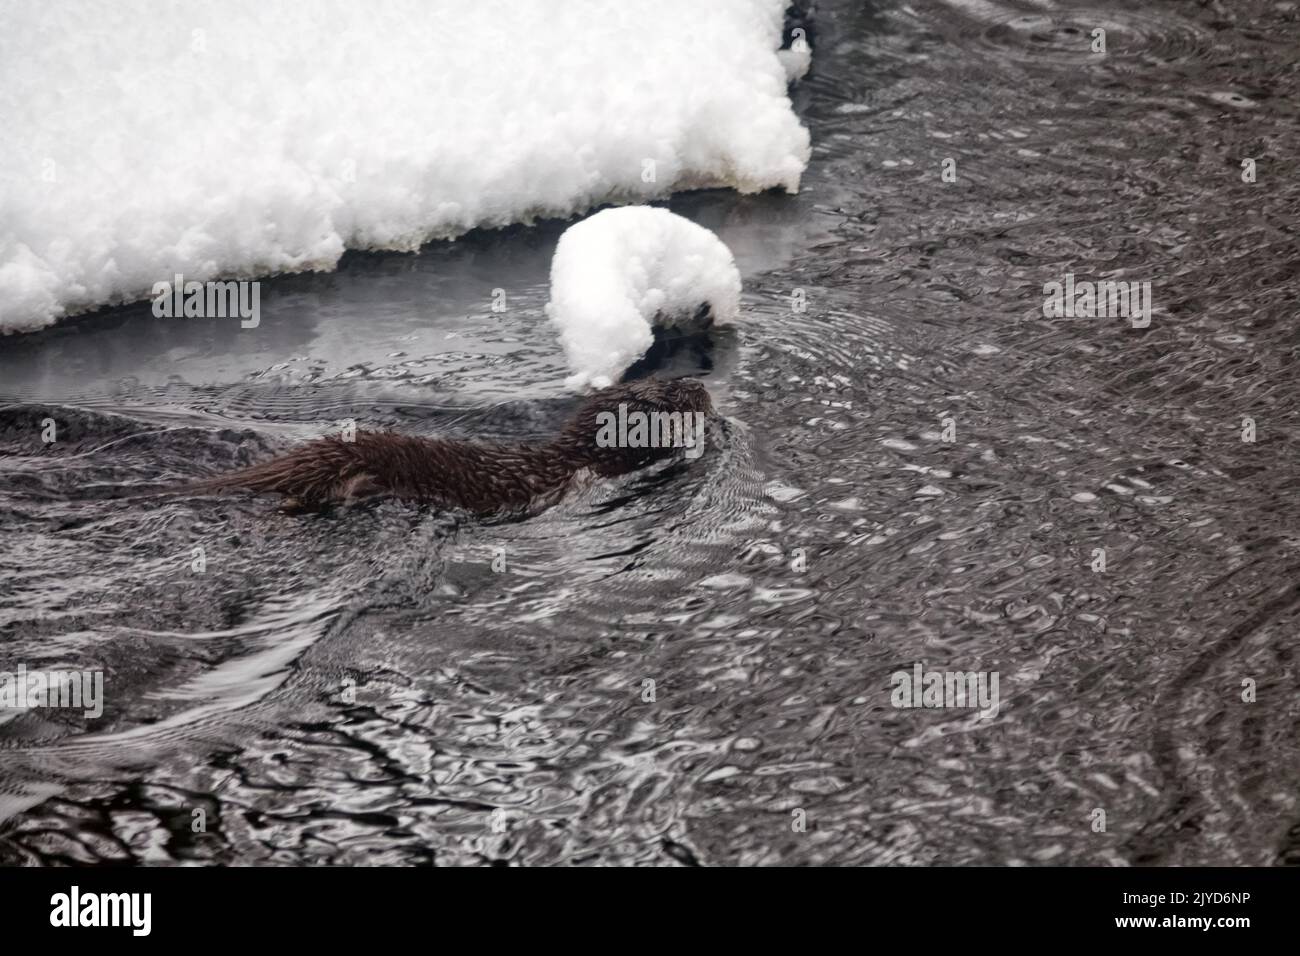 A young otter on the freezing northern river. Prefers rivers with pools, whirls, rapids that do not freeze in winter. In winter, otters leave their fa Stock Photo